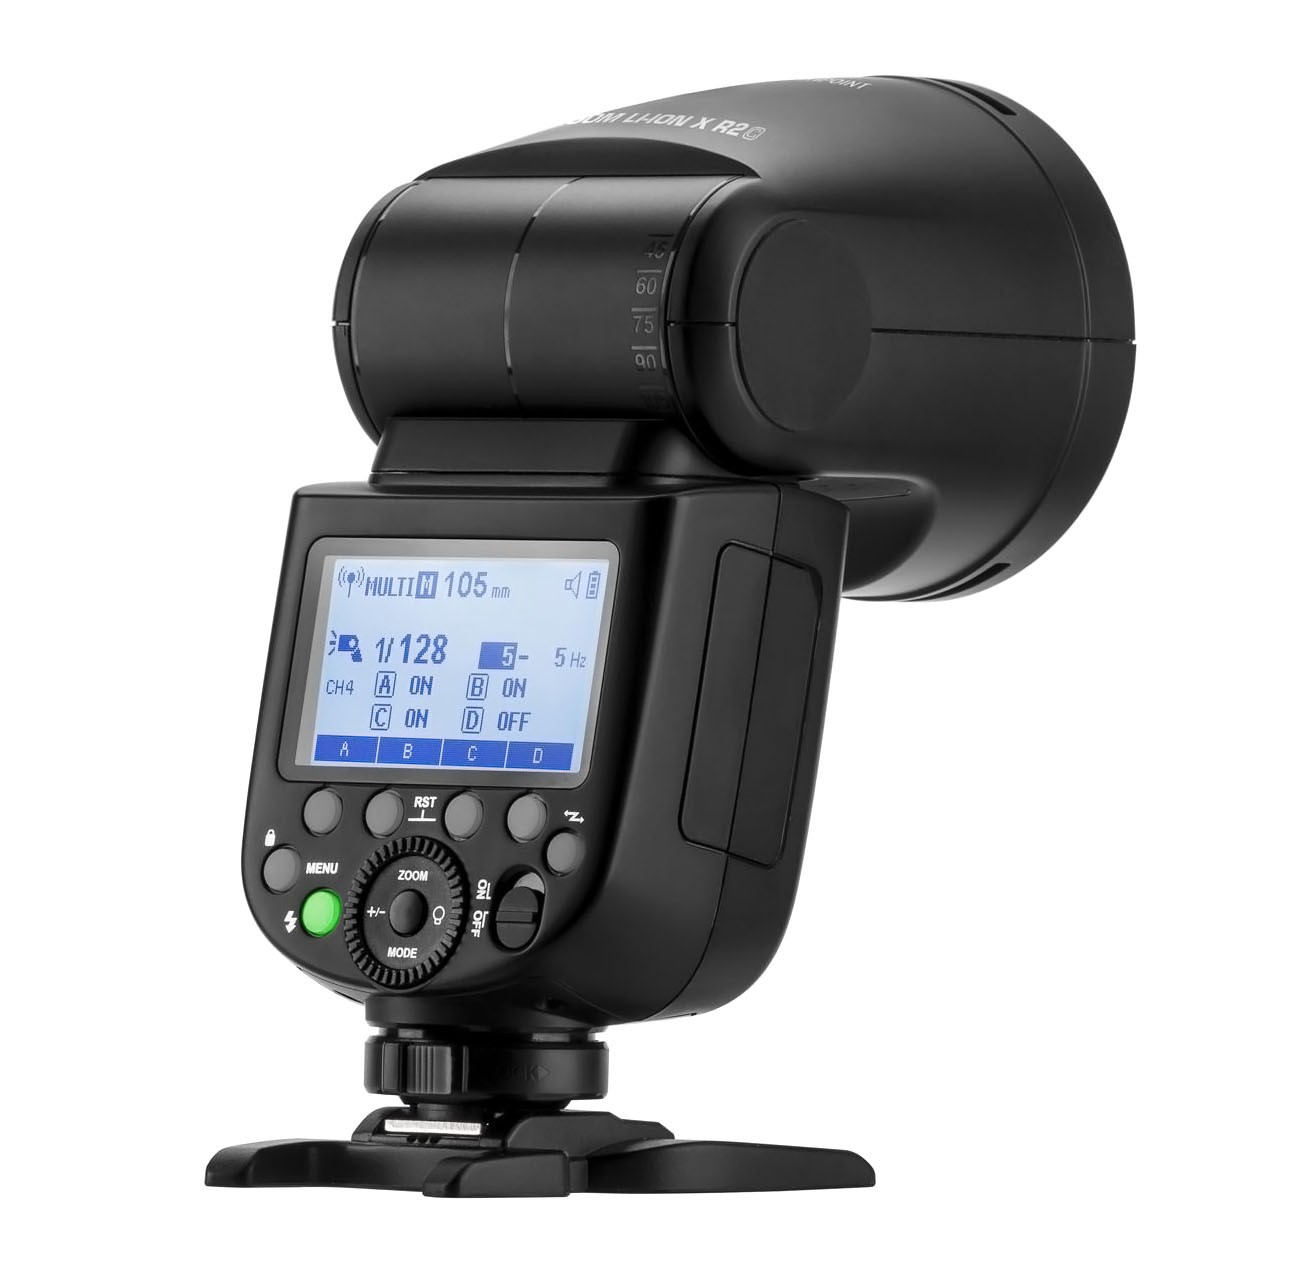 Godox releases new V1 firmware for Nikon, Canon and Sony to address  overheating issues